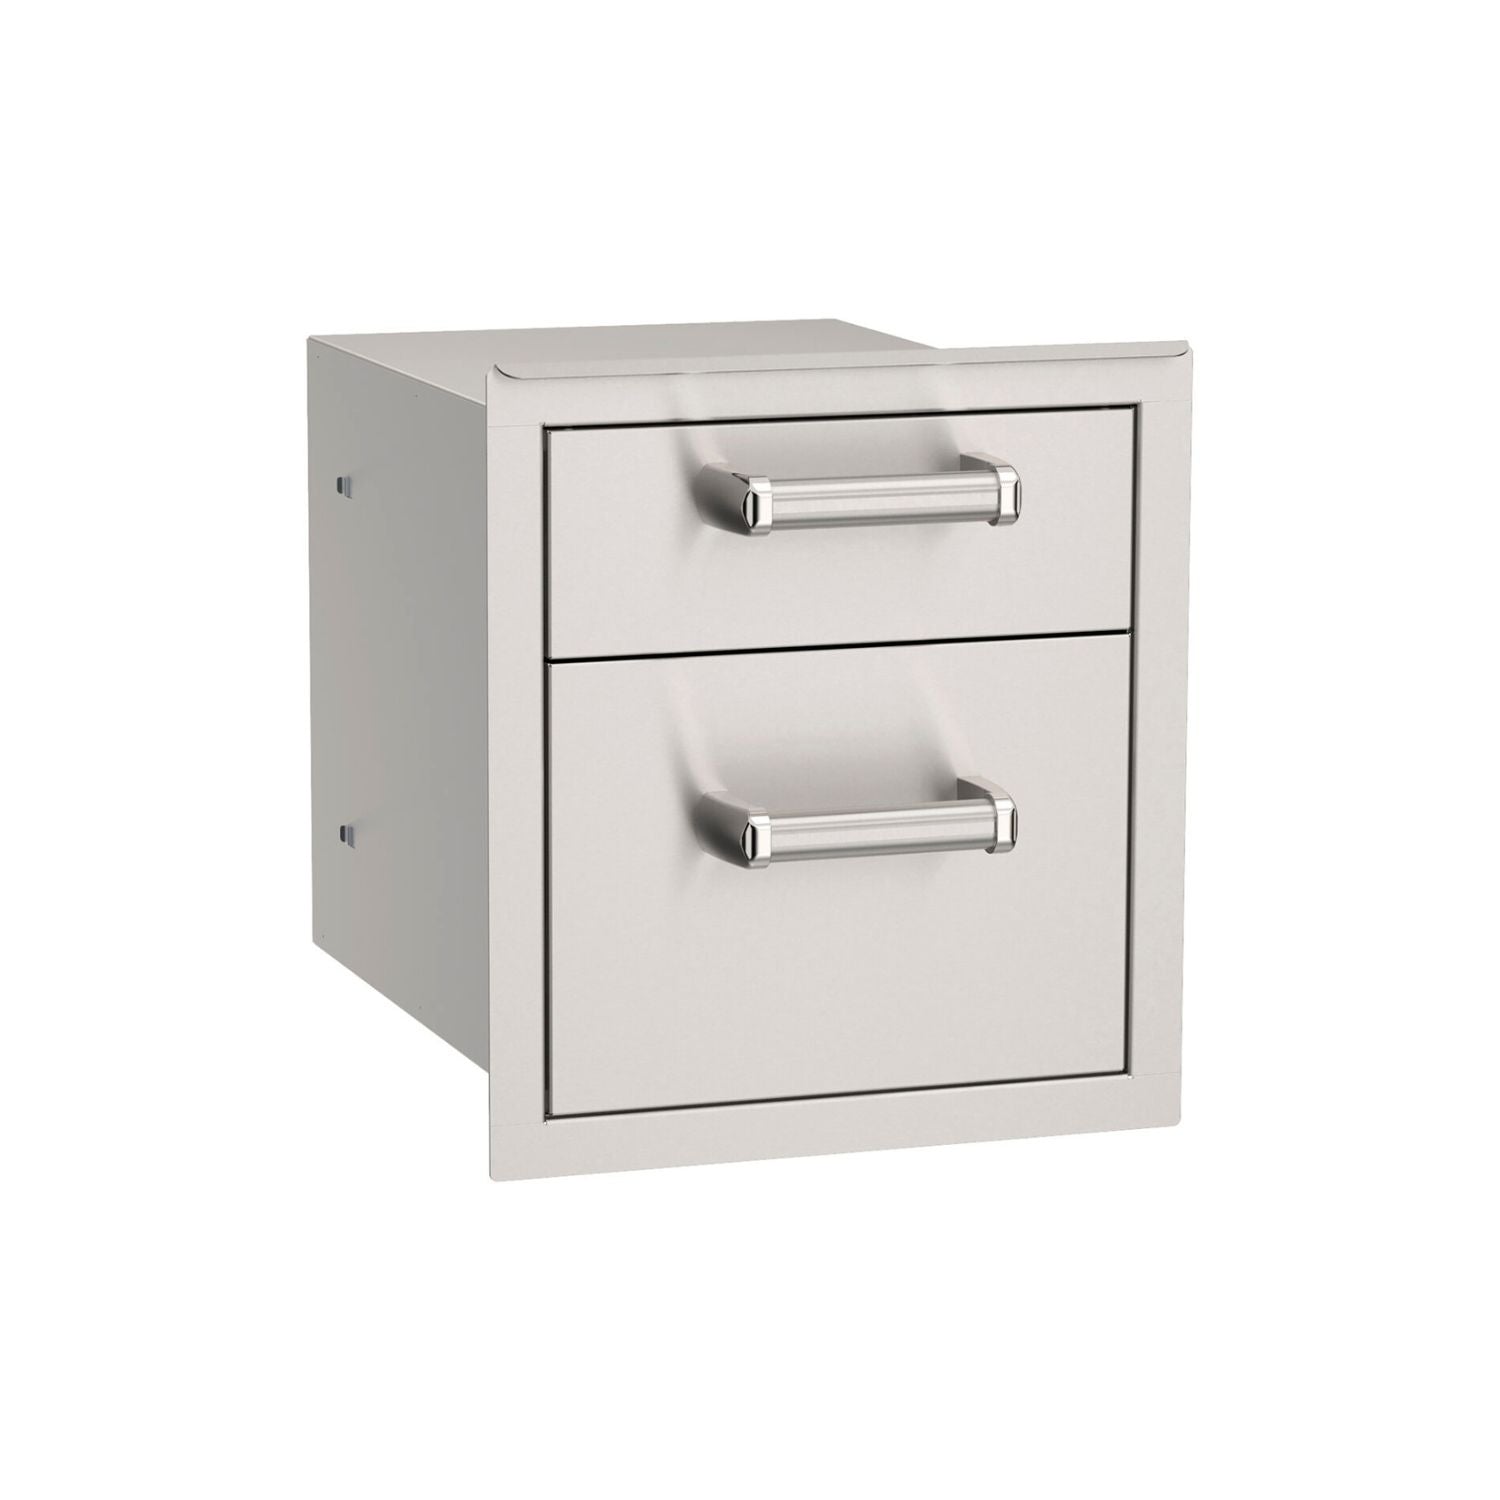 Fire Magic Premium Flush 14-Inch Double Access Drawer With Soft Close Cabinets & Storage 12043565